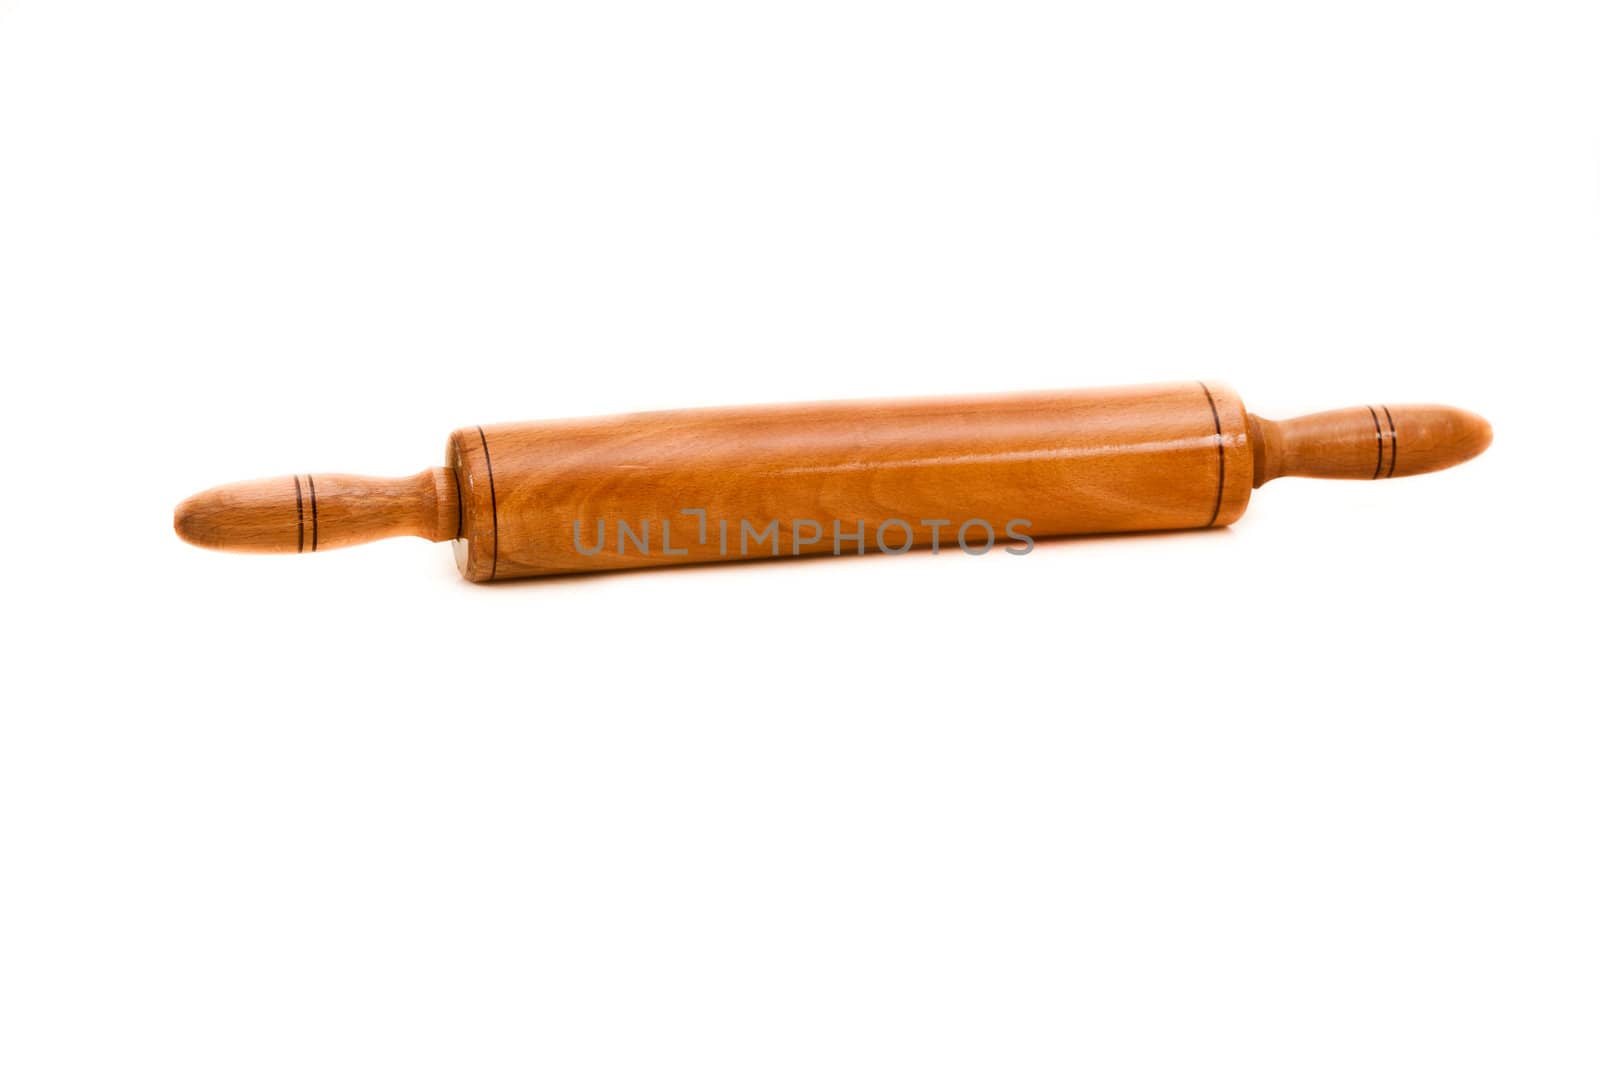 Rolling pin tool kitchen cooking cuisine wooden by oguzdkn